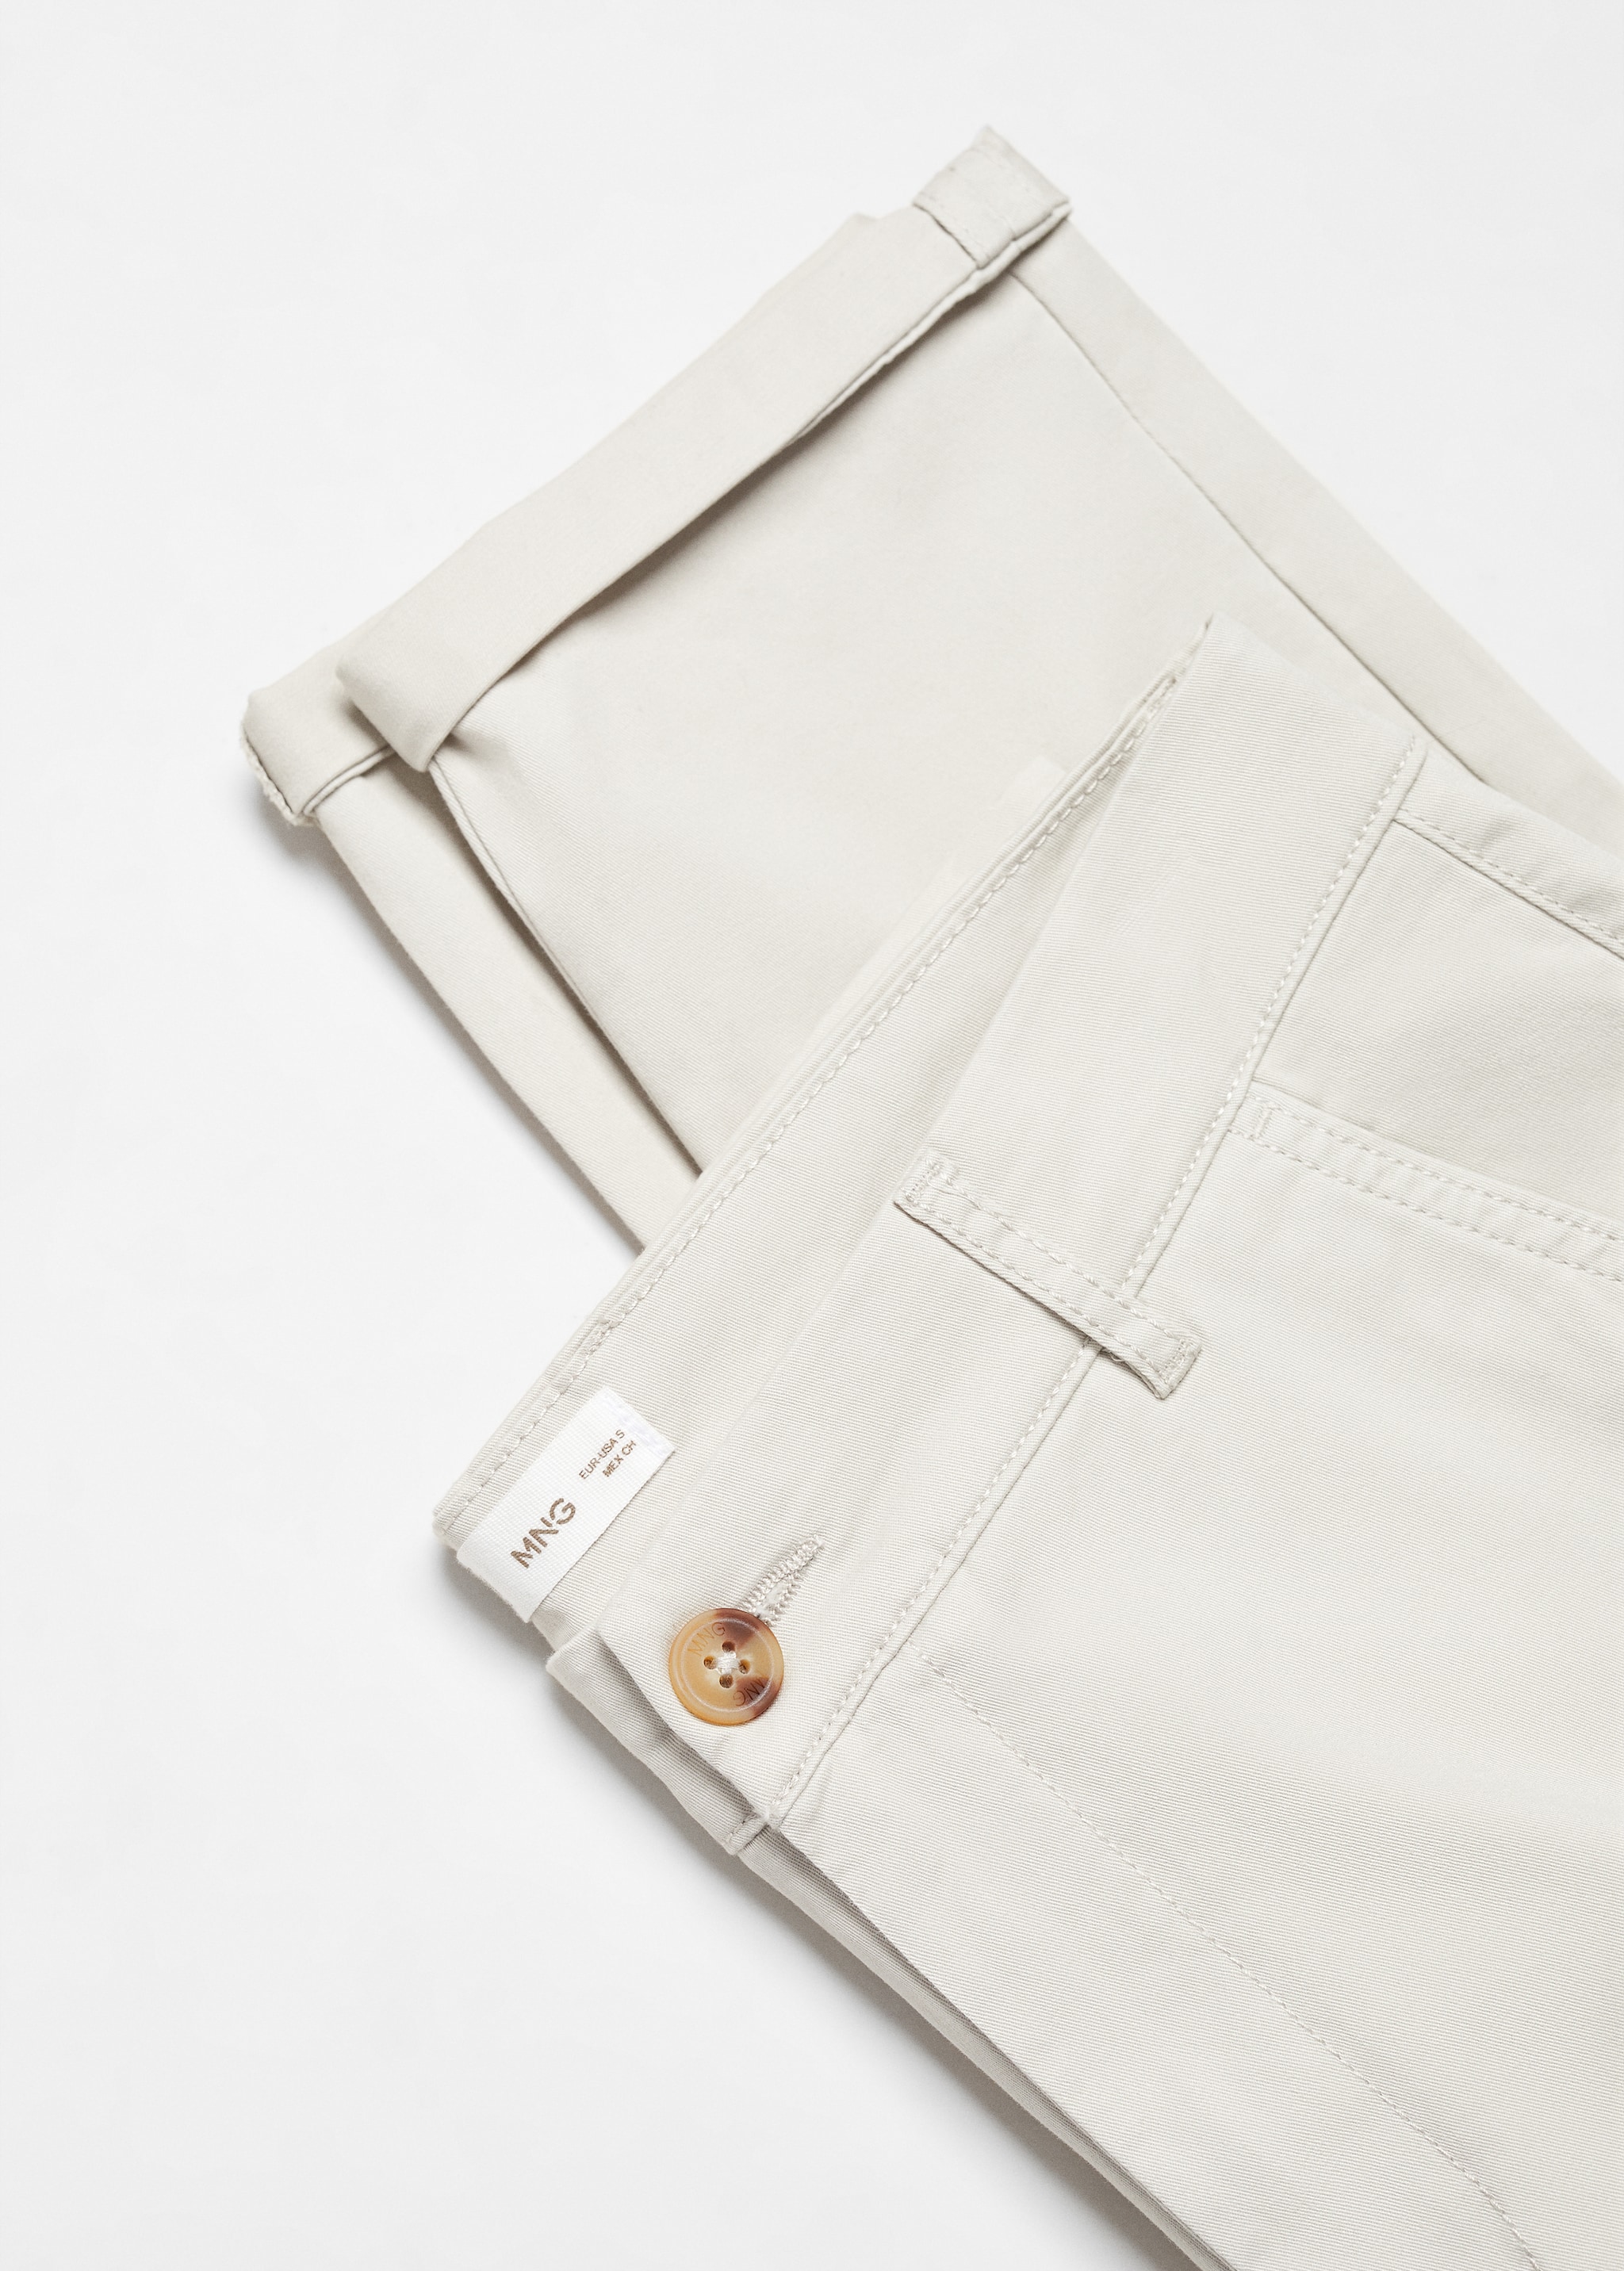 Cotton chinos - Details of the article 8